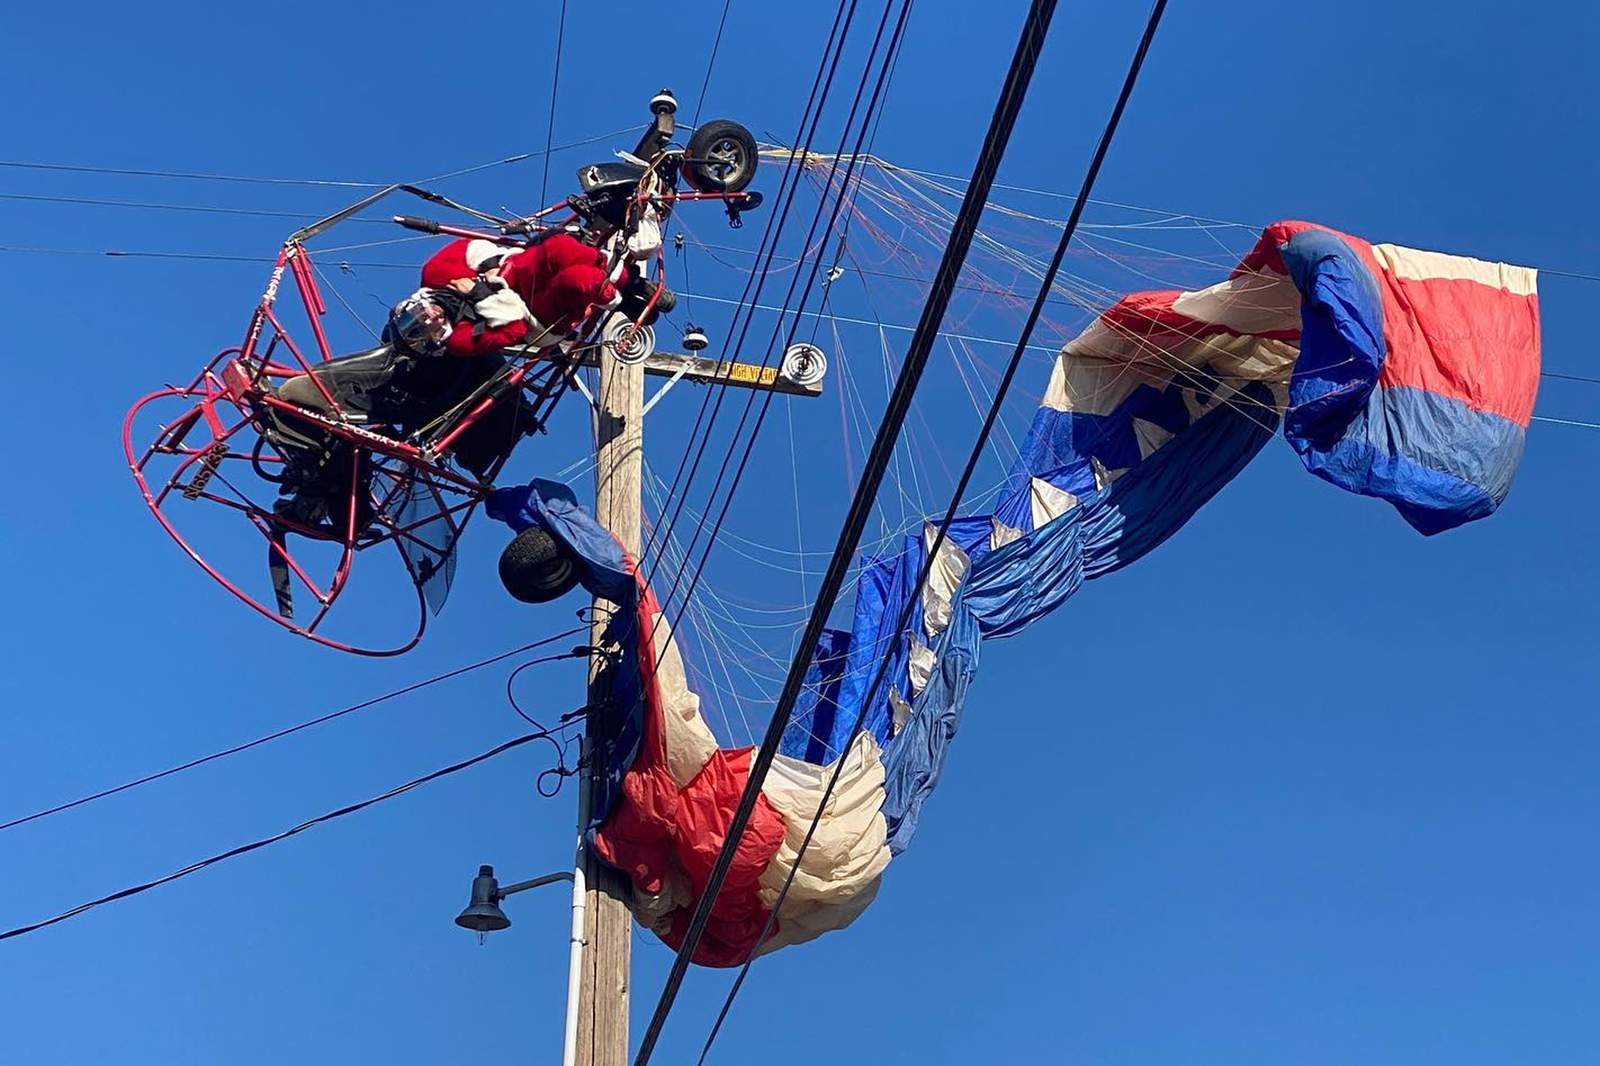 Man dressed as Santa rescued from power lines in California